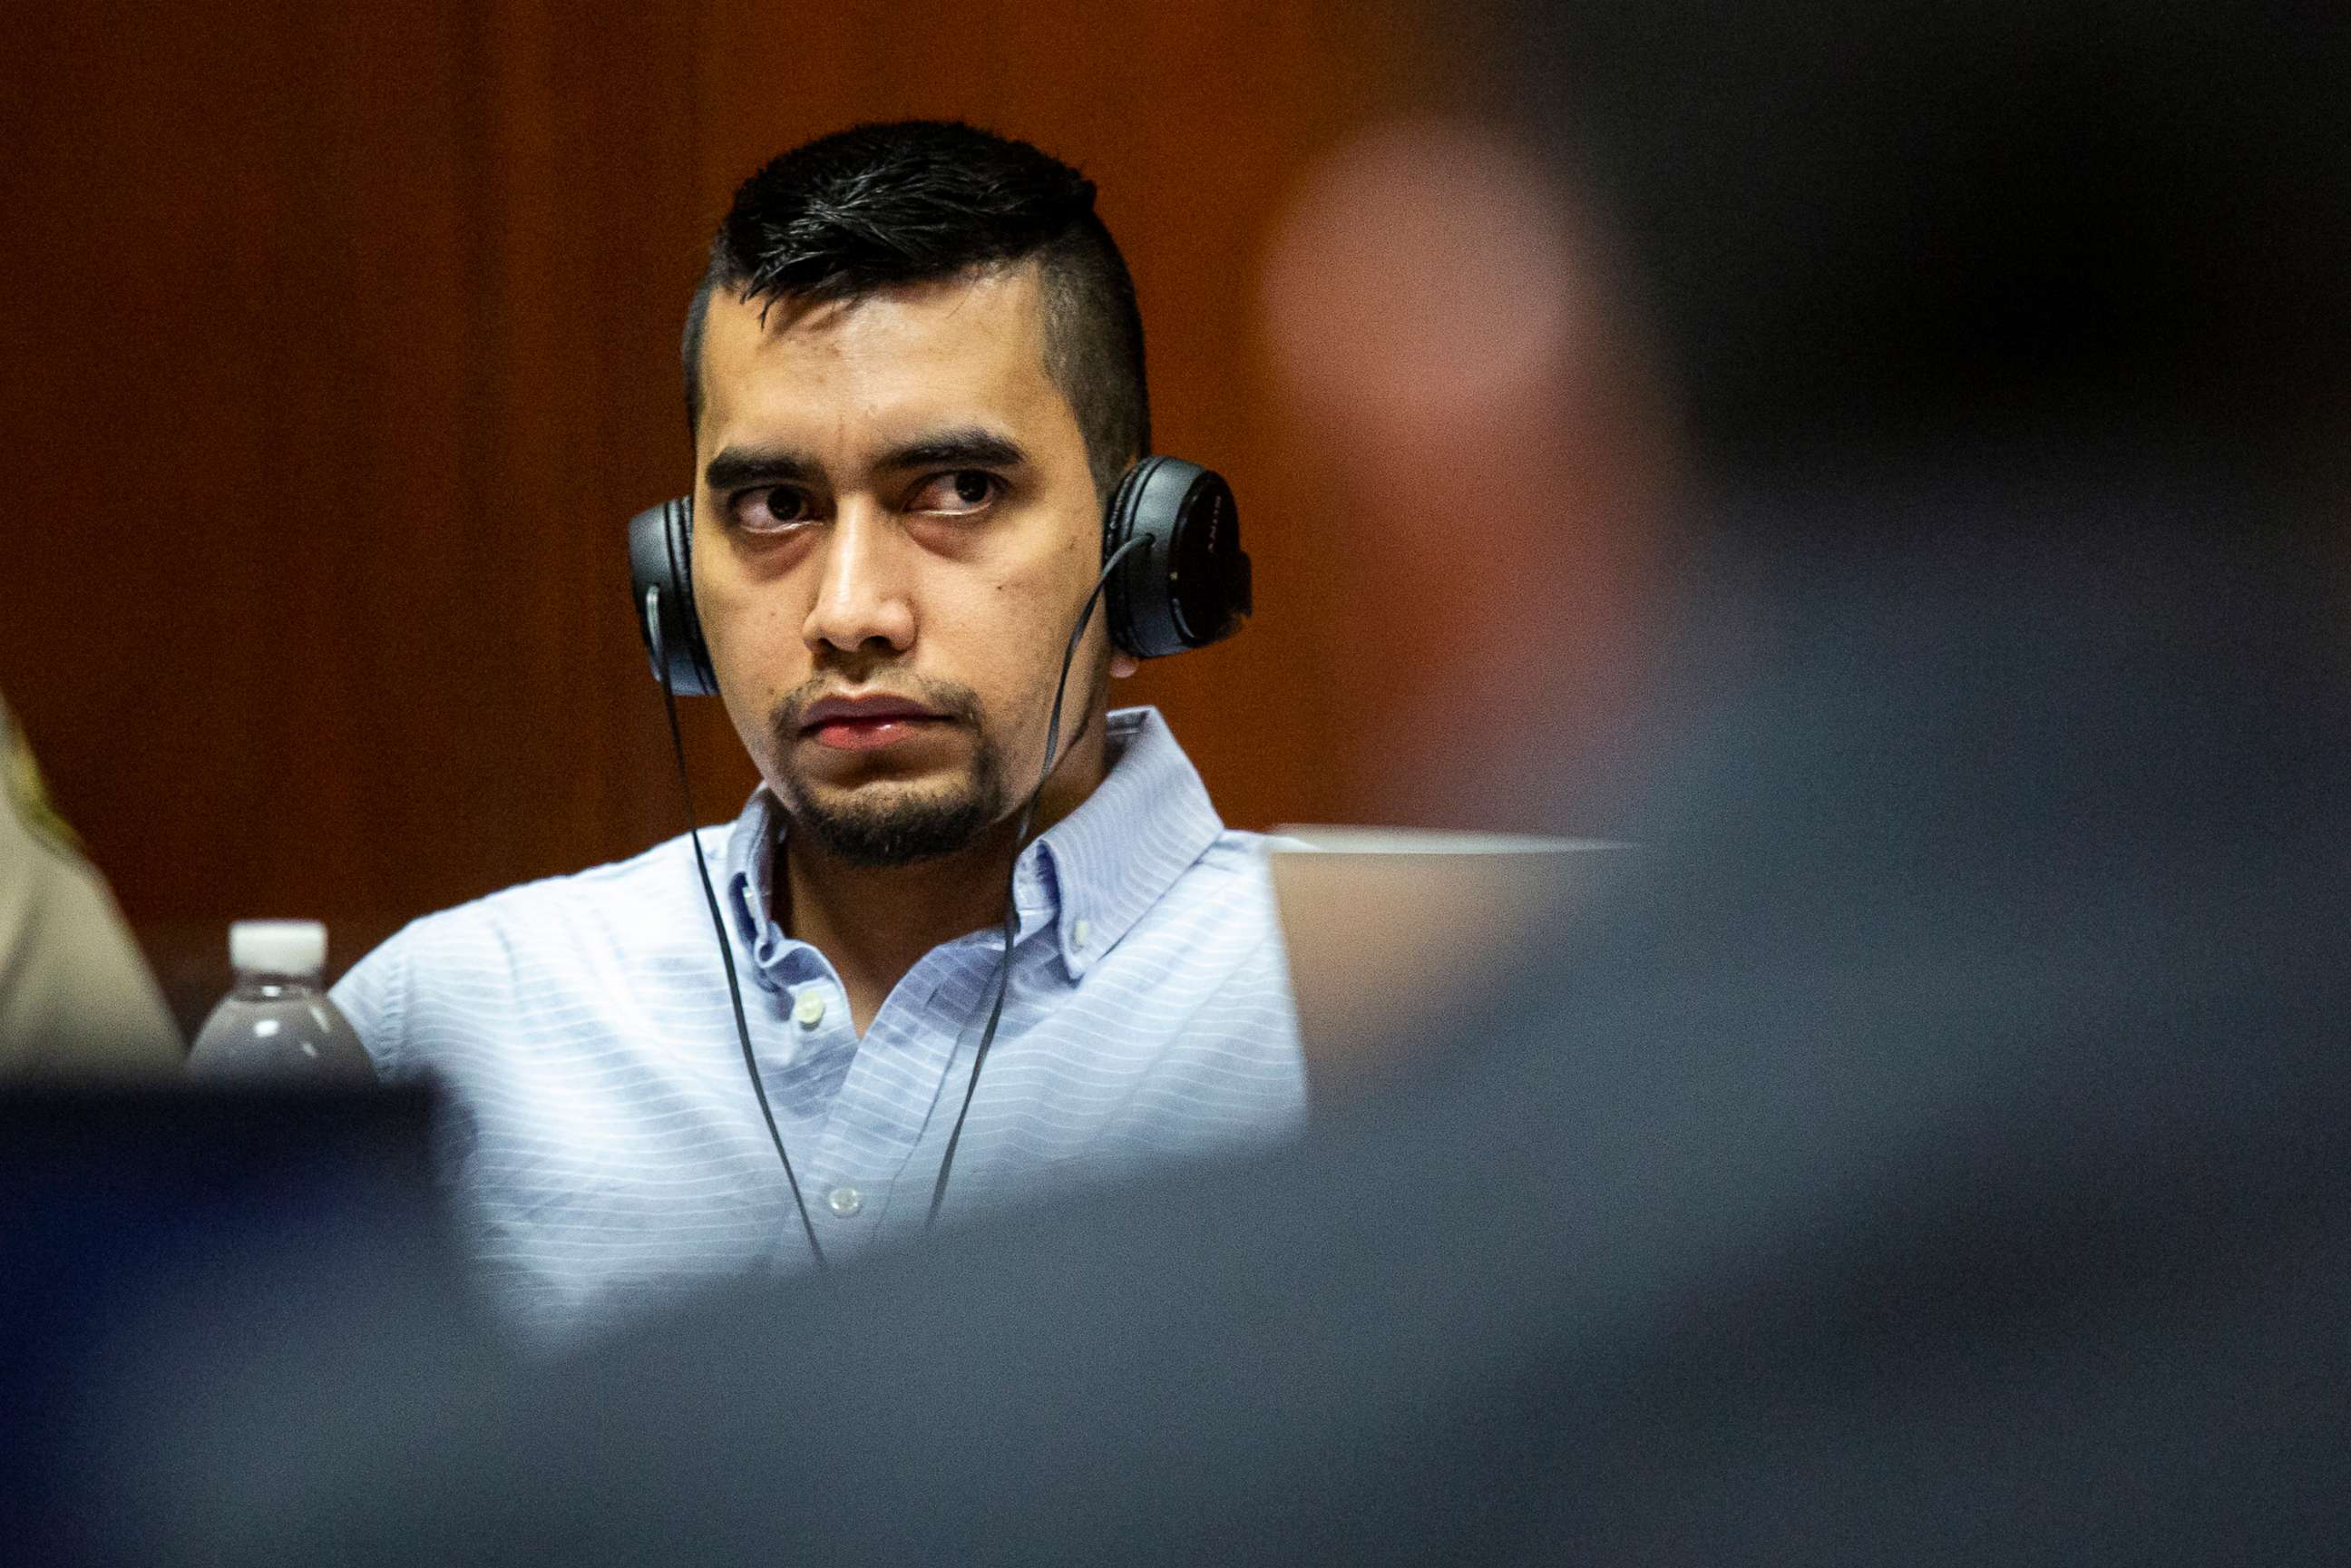 PHOTO: Cristhian Bahena Rivera listens to court proceedings during his trial, May 25, 2021, in the Scott County Courthouse in Davenport, Iowa.